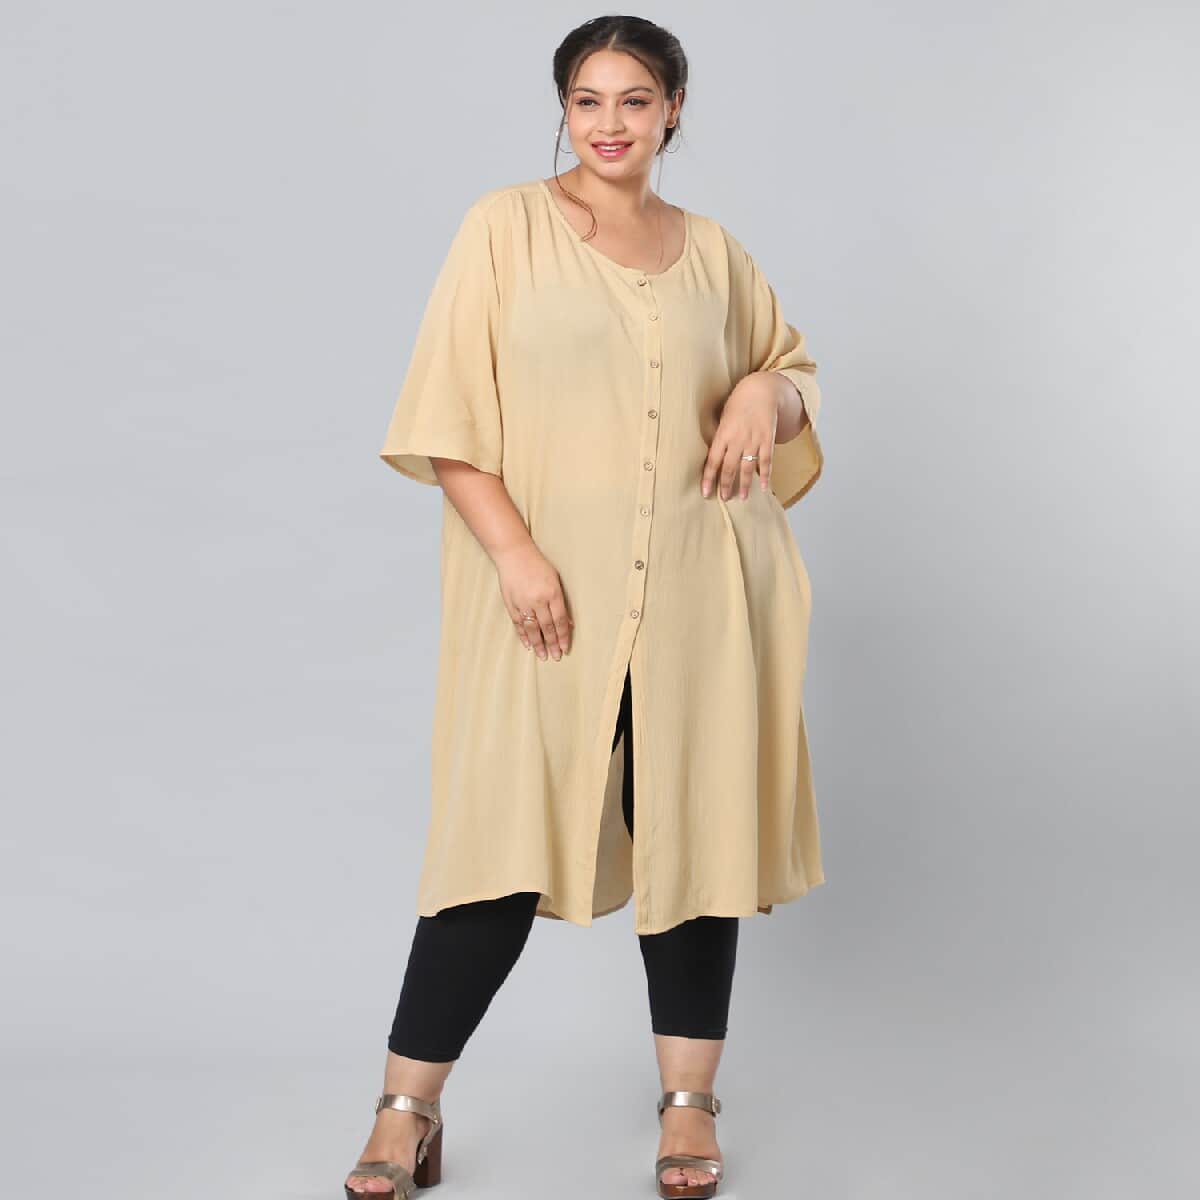 Beige 100% Rayon Top with Front Closure with Button- L/XL image number 0